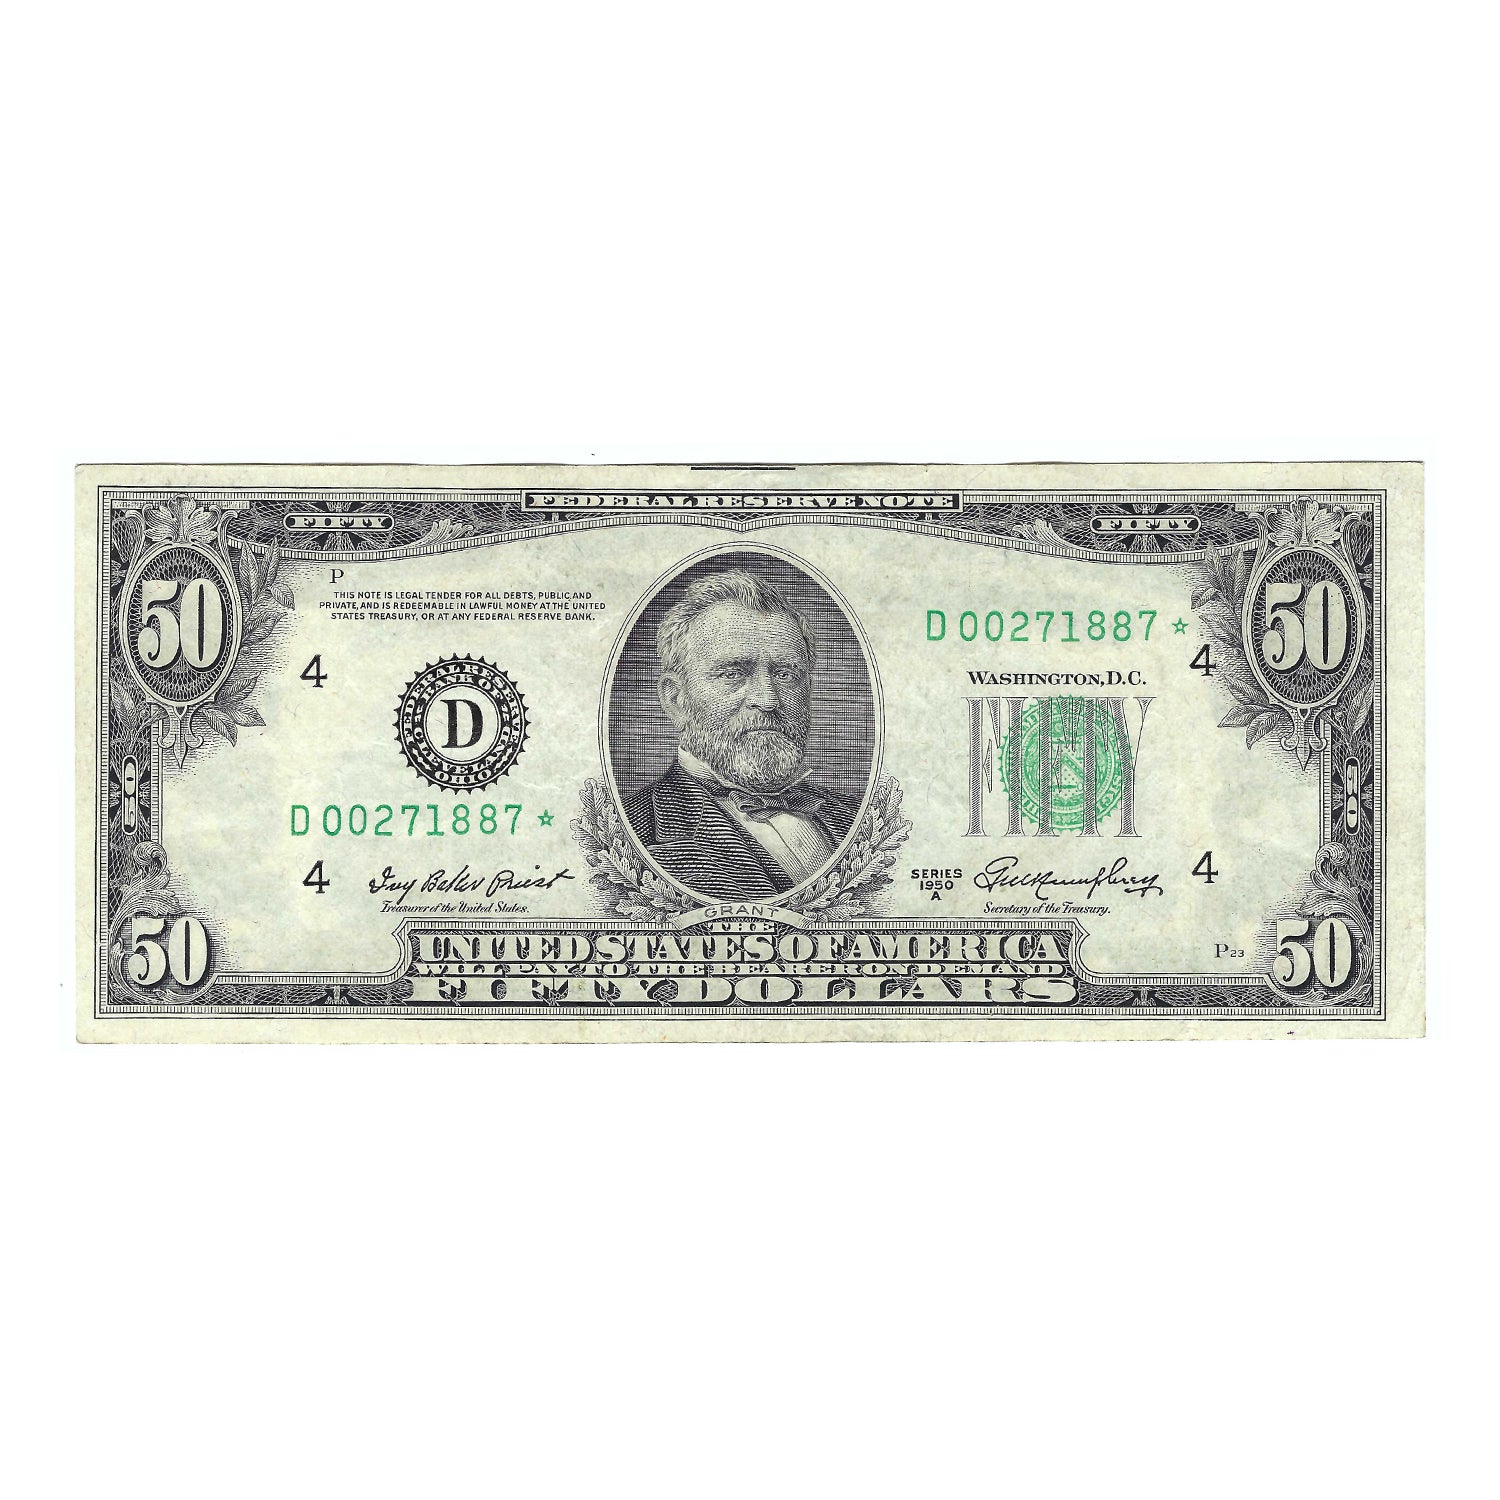 1950-A $50 Small Size Federal Reserve Star Note, Priest-Humphrey, Uncirculated